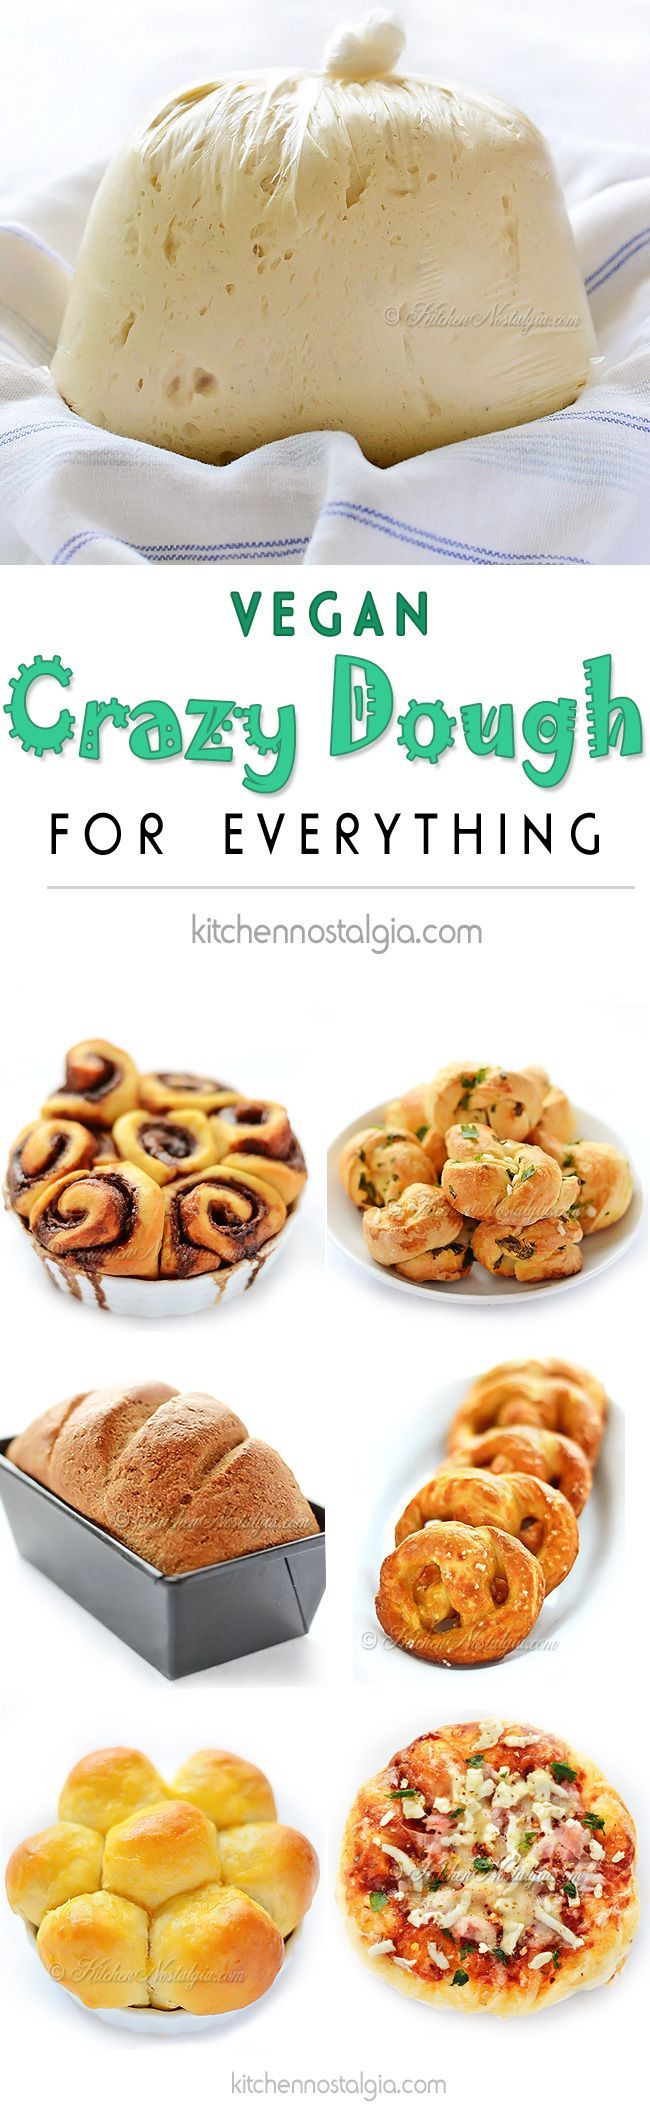 Vegan Crazy Dough for Everything – make one miracle dough, keep it in the fridge and use it for anythi